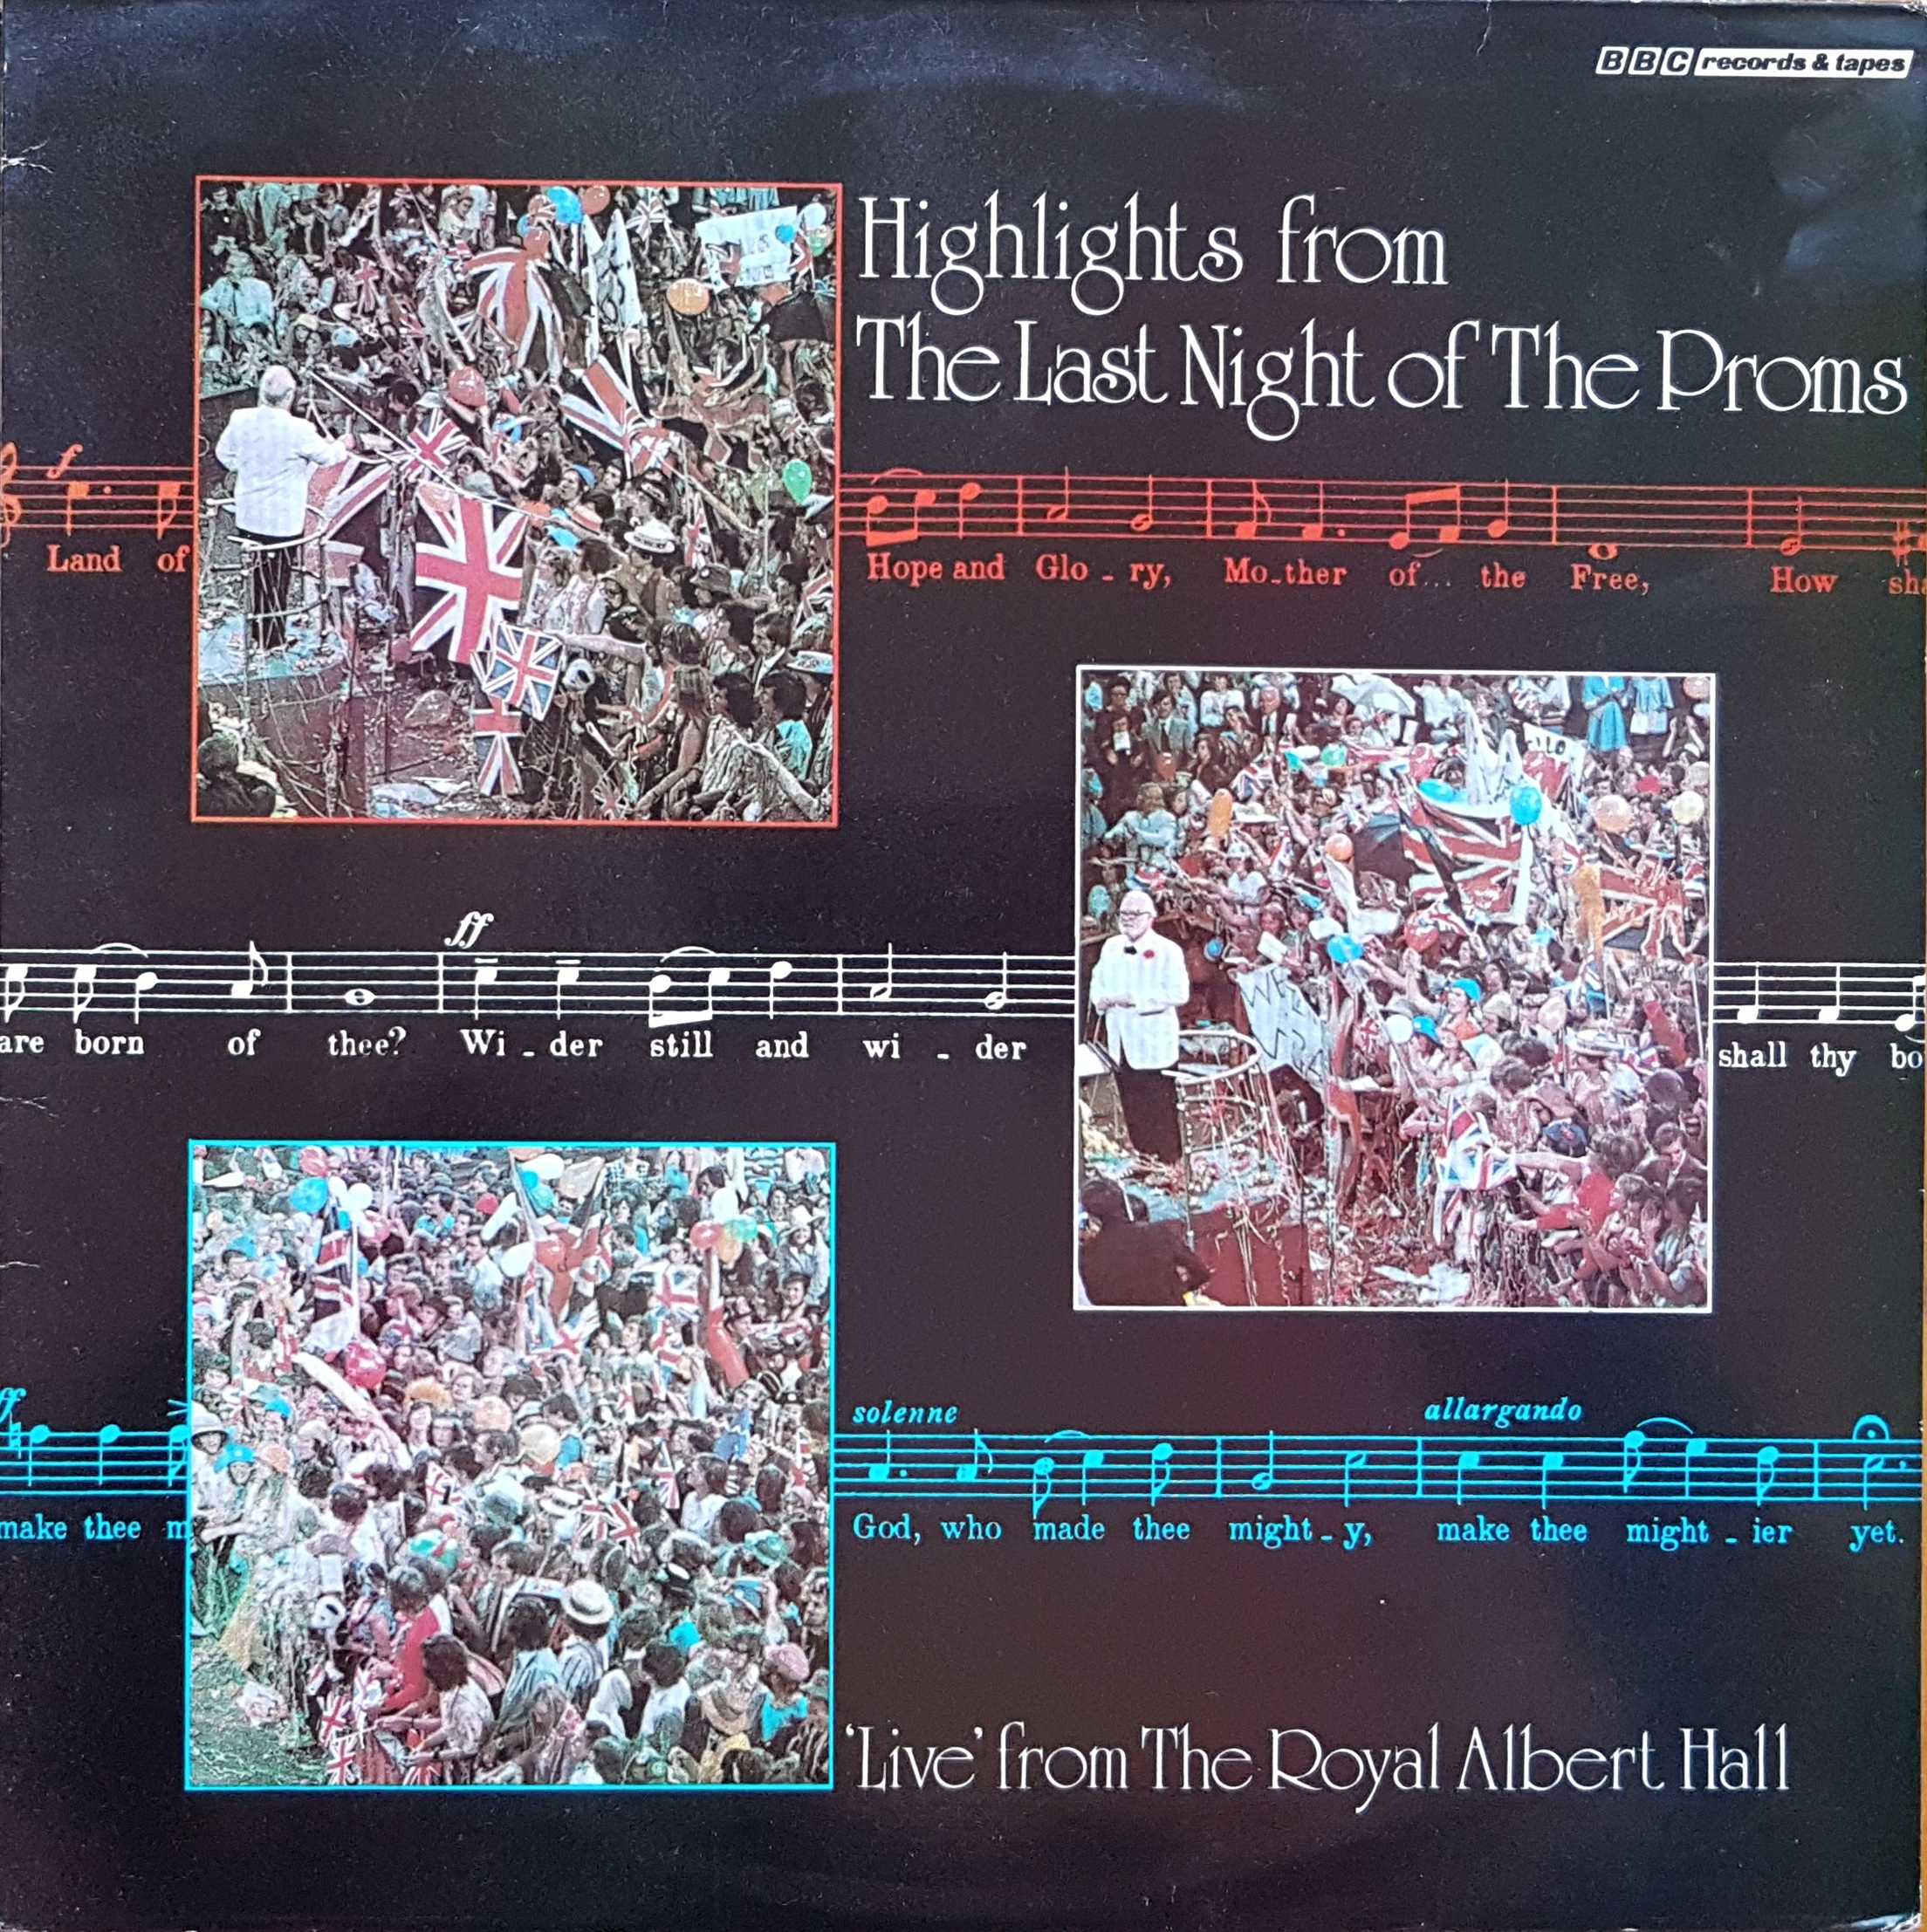 Picture of REH 290 Last night of the proms by artist Various from the BBC albums - Records and Tapes library